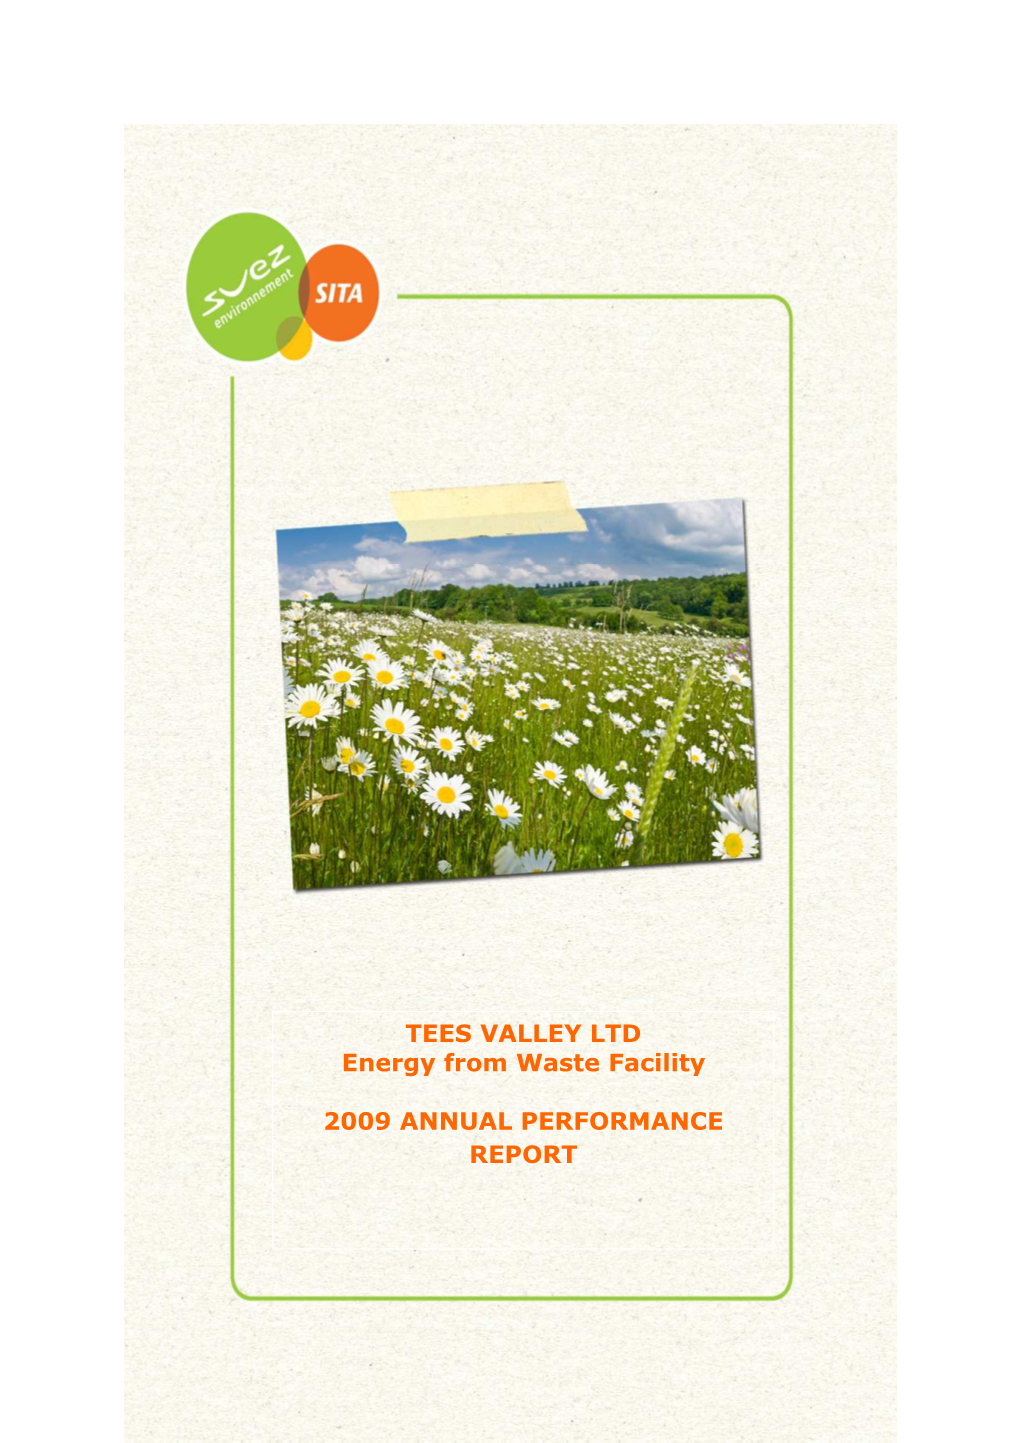 TEES VALLEY LTD Energy from Waste Facility 2009 ANNUAL